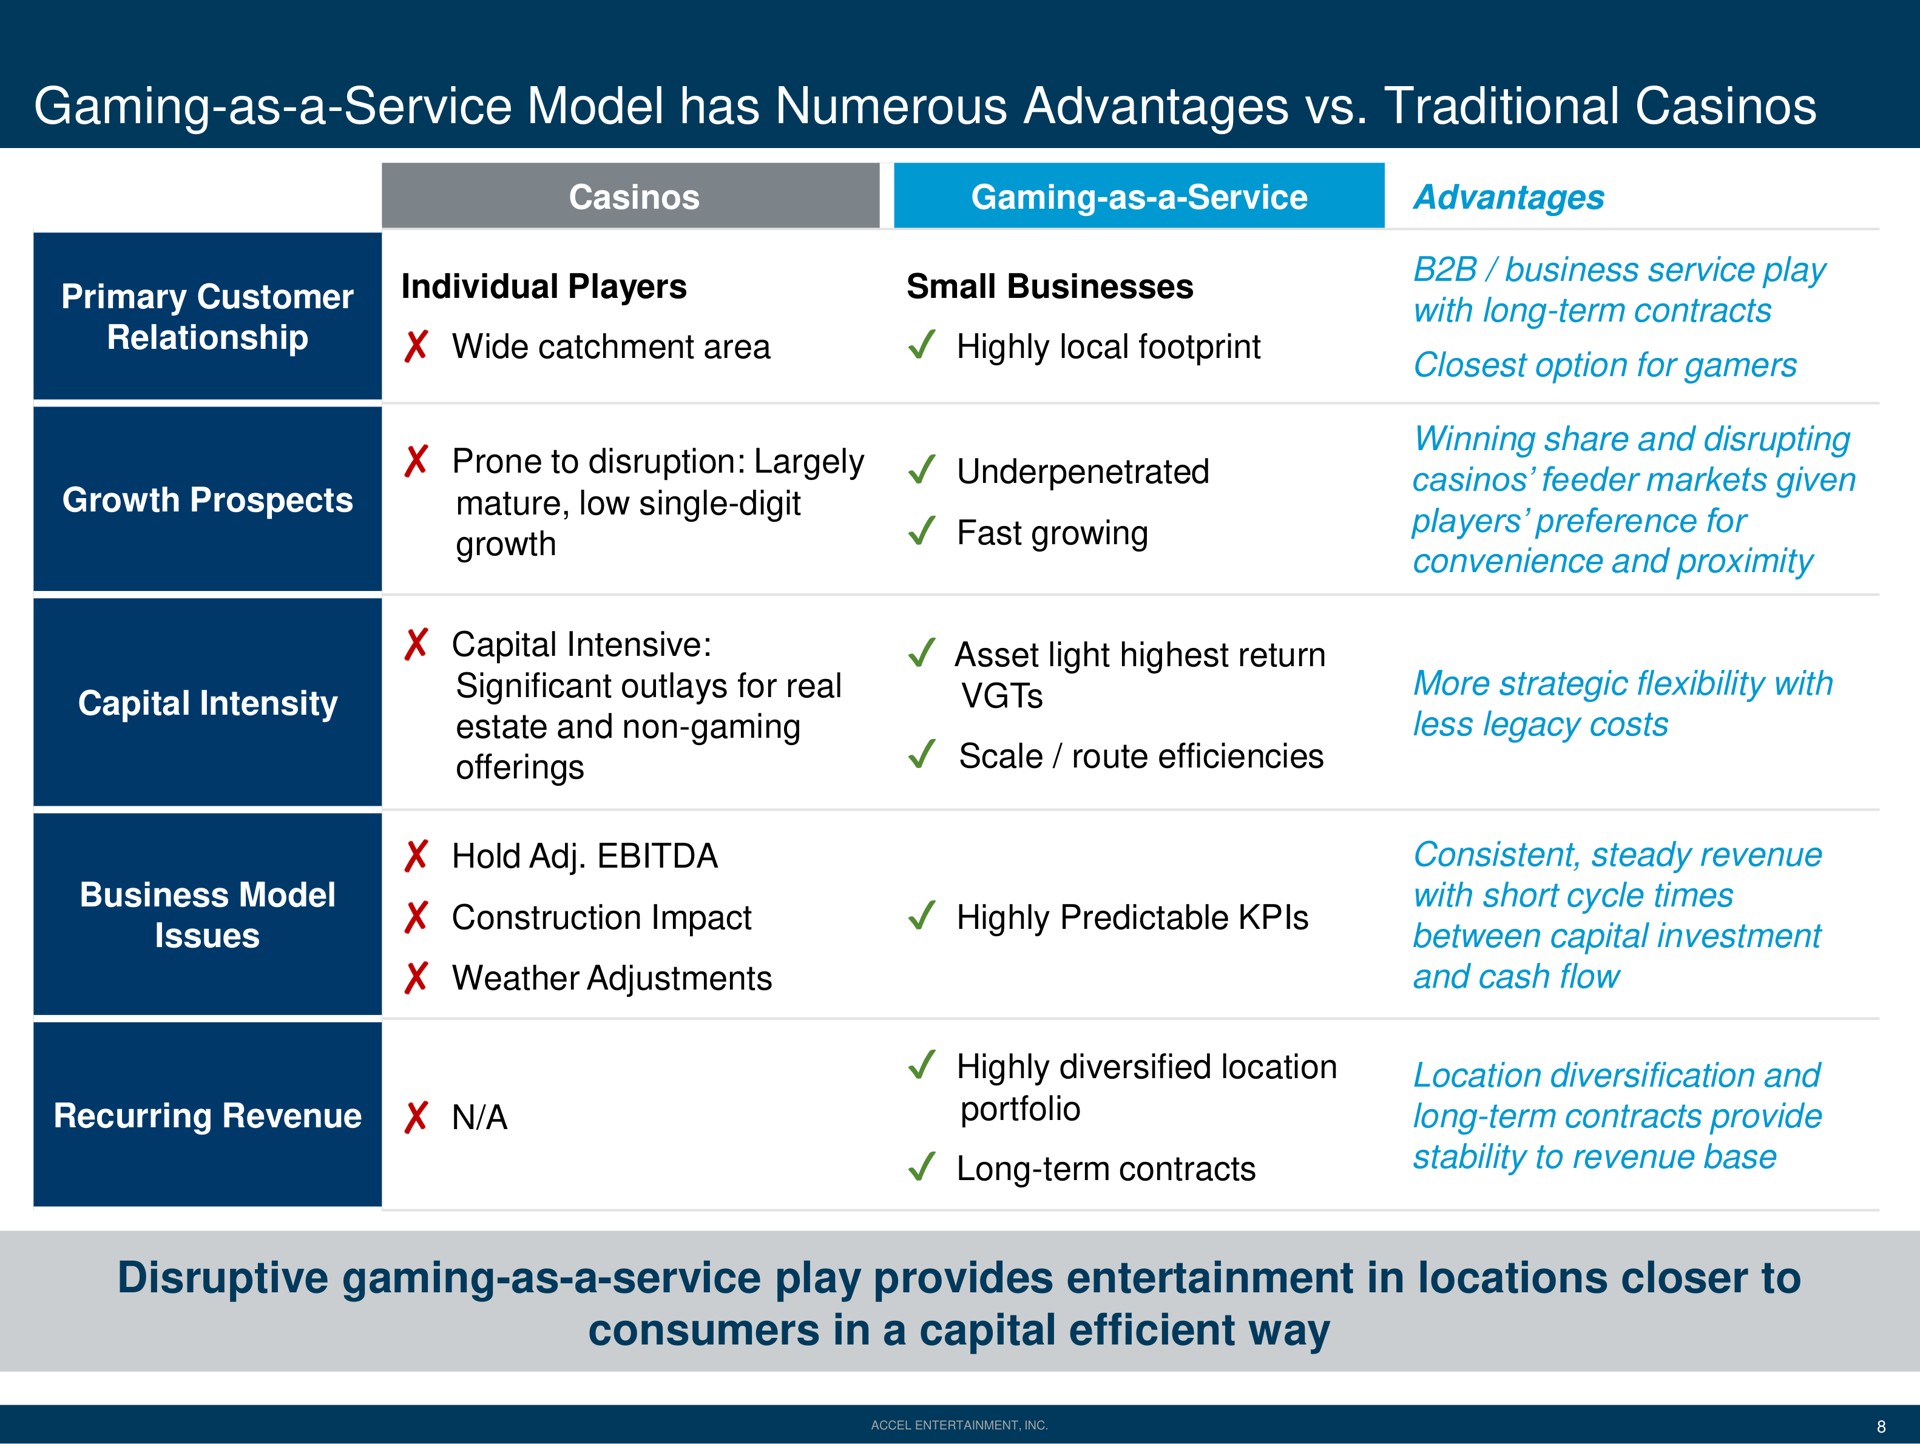 gaming as a service model has numerous advantages traditional casinos disruptive gaming as a service play provides entertainment in locations closer to consumers in a capital efficient way primary customer relationship wide catchment area highly local footprint with long term contracts prone disruption largely feeder markets given oer intensive significant outlays for real offerings asset light highest return scale route efficiencies more strategic flexibility with construction impact highly predictable between investment recurring revenue highly diversified location portfolio diversification and long term contracts provide | Accel Entertaiment